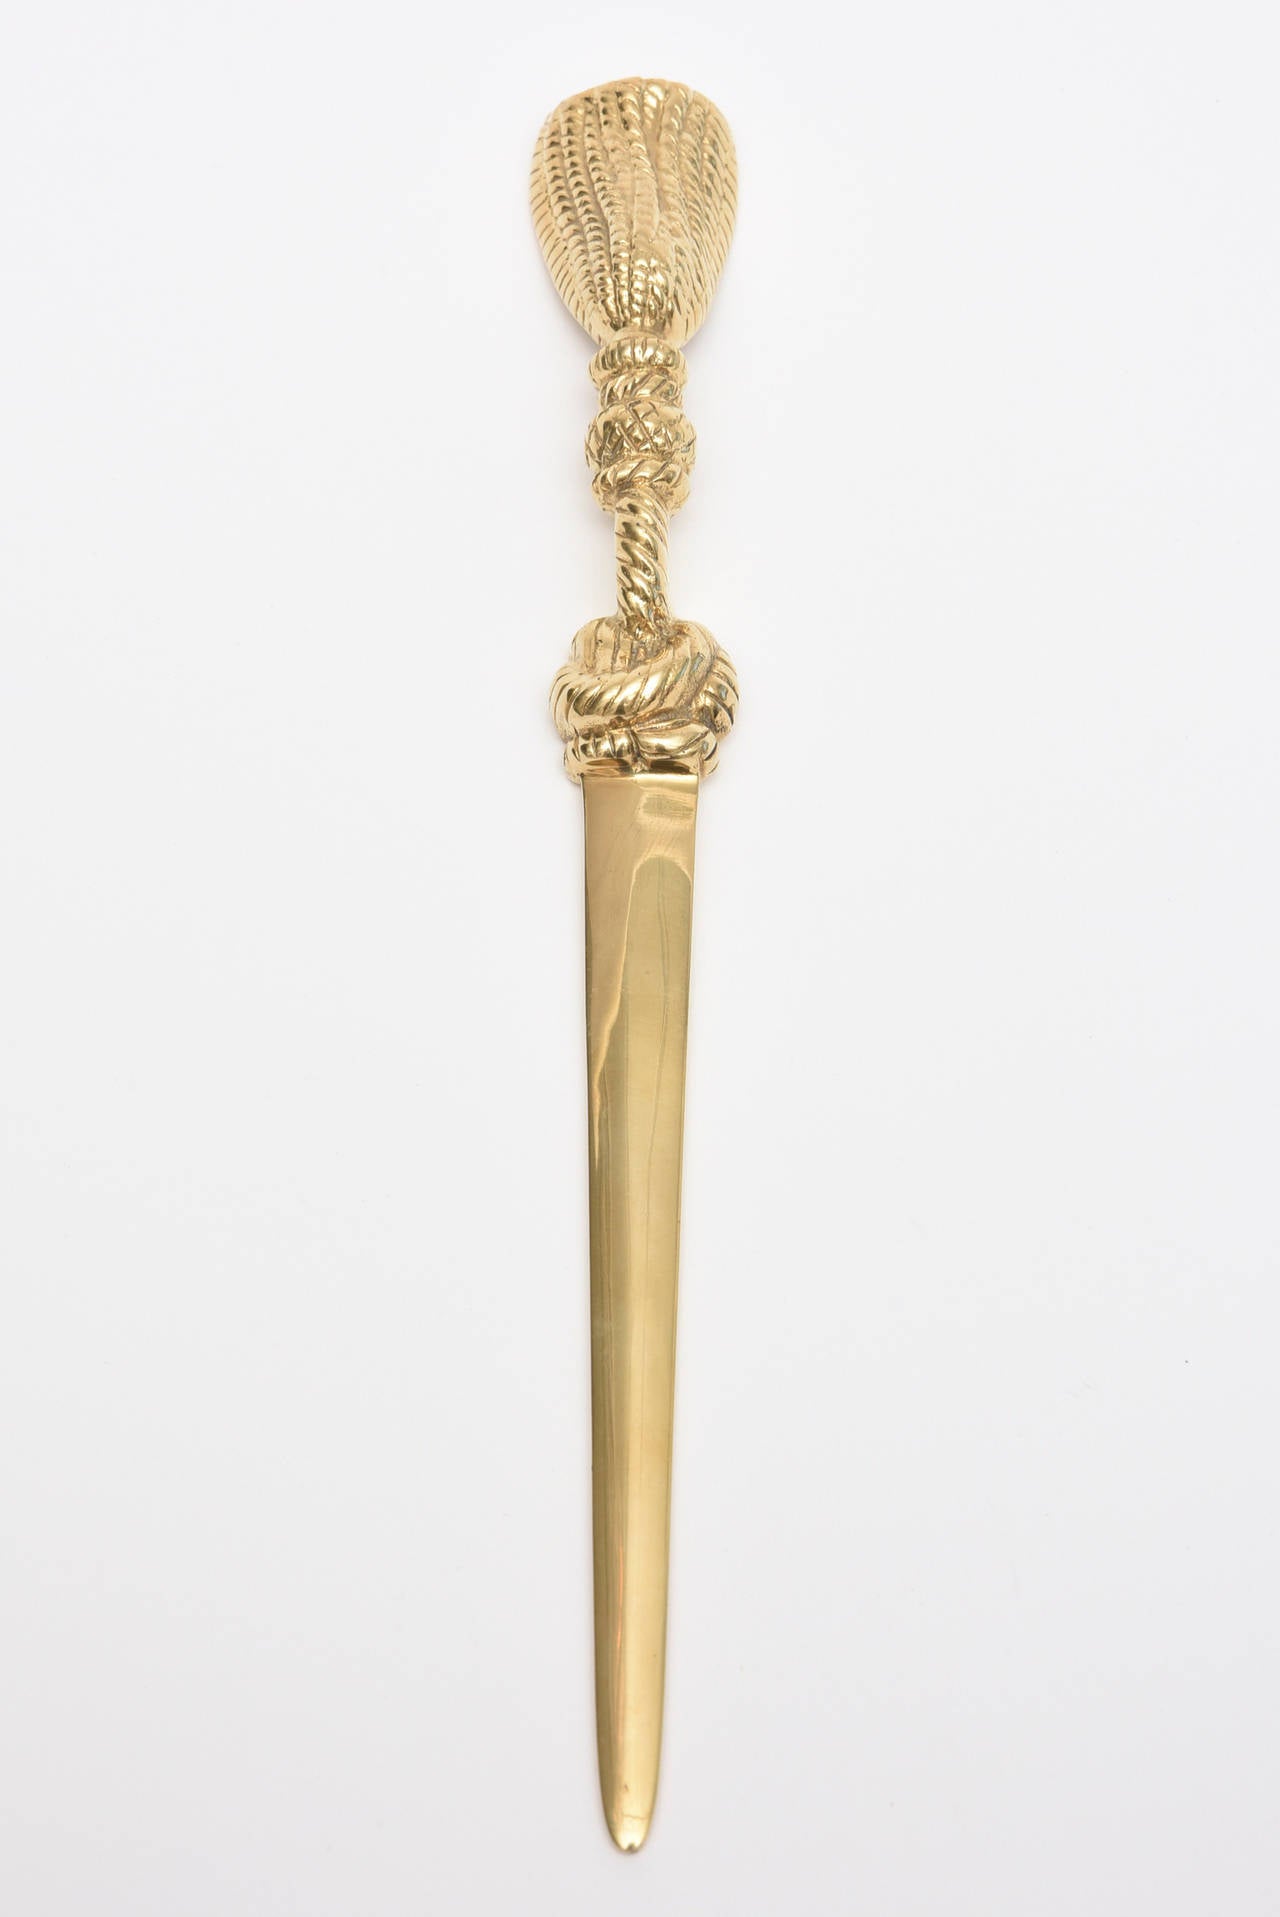 This lovely desk accessory is a solid brass letter opener with a tassel design at the end and a braided tassel design at the other end.
This would also make a fantastic gift for someone.